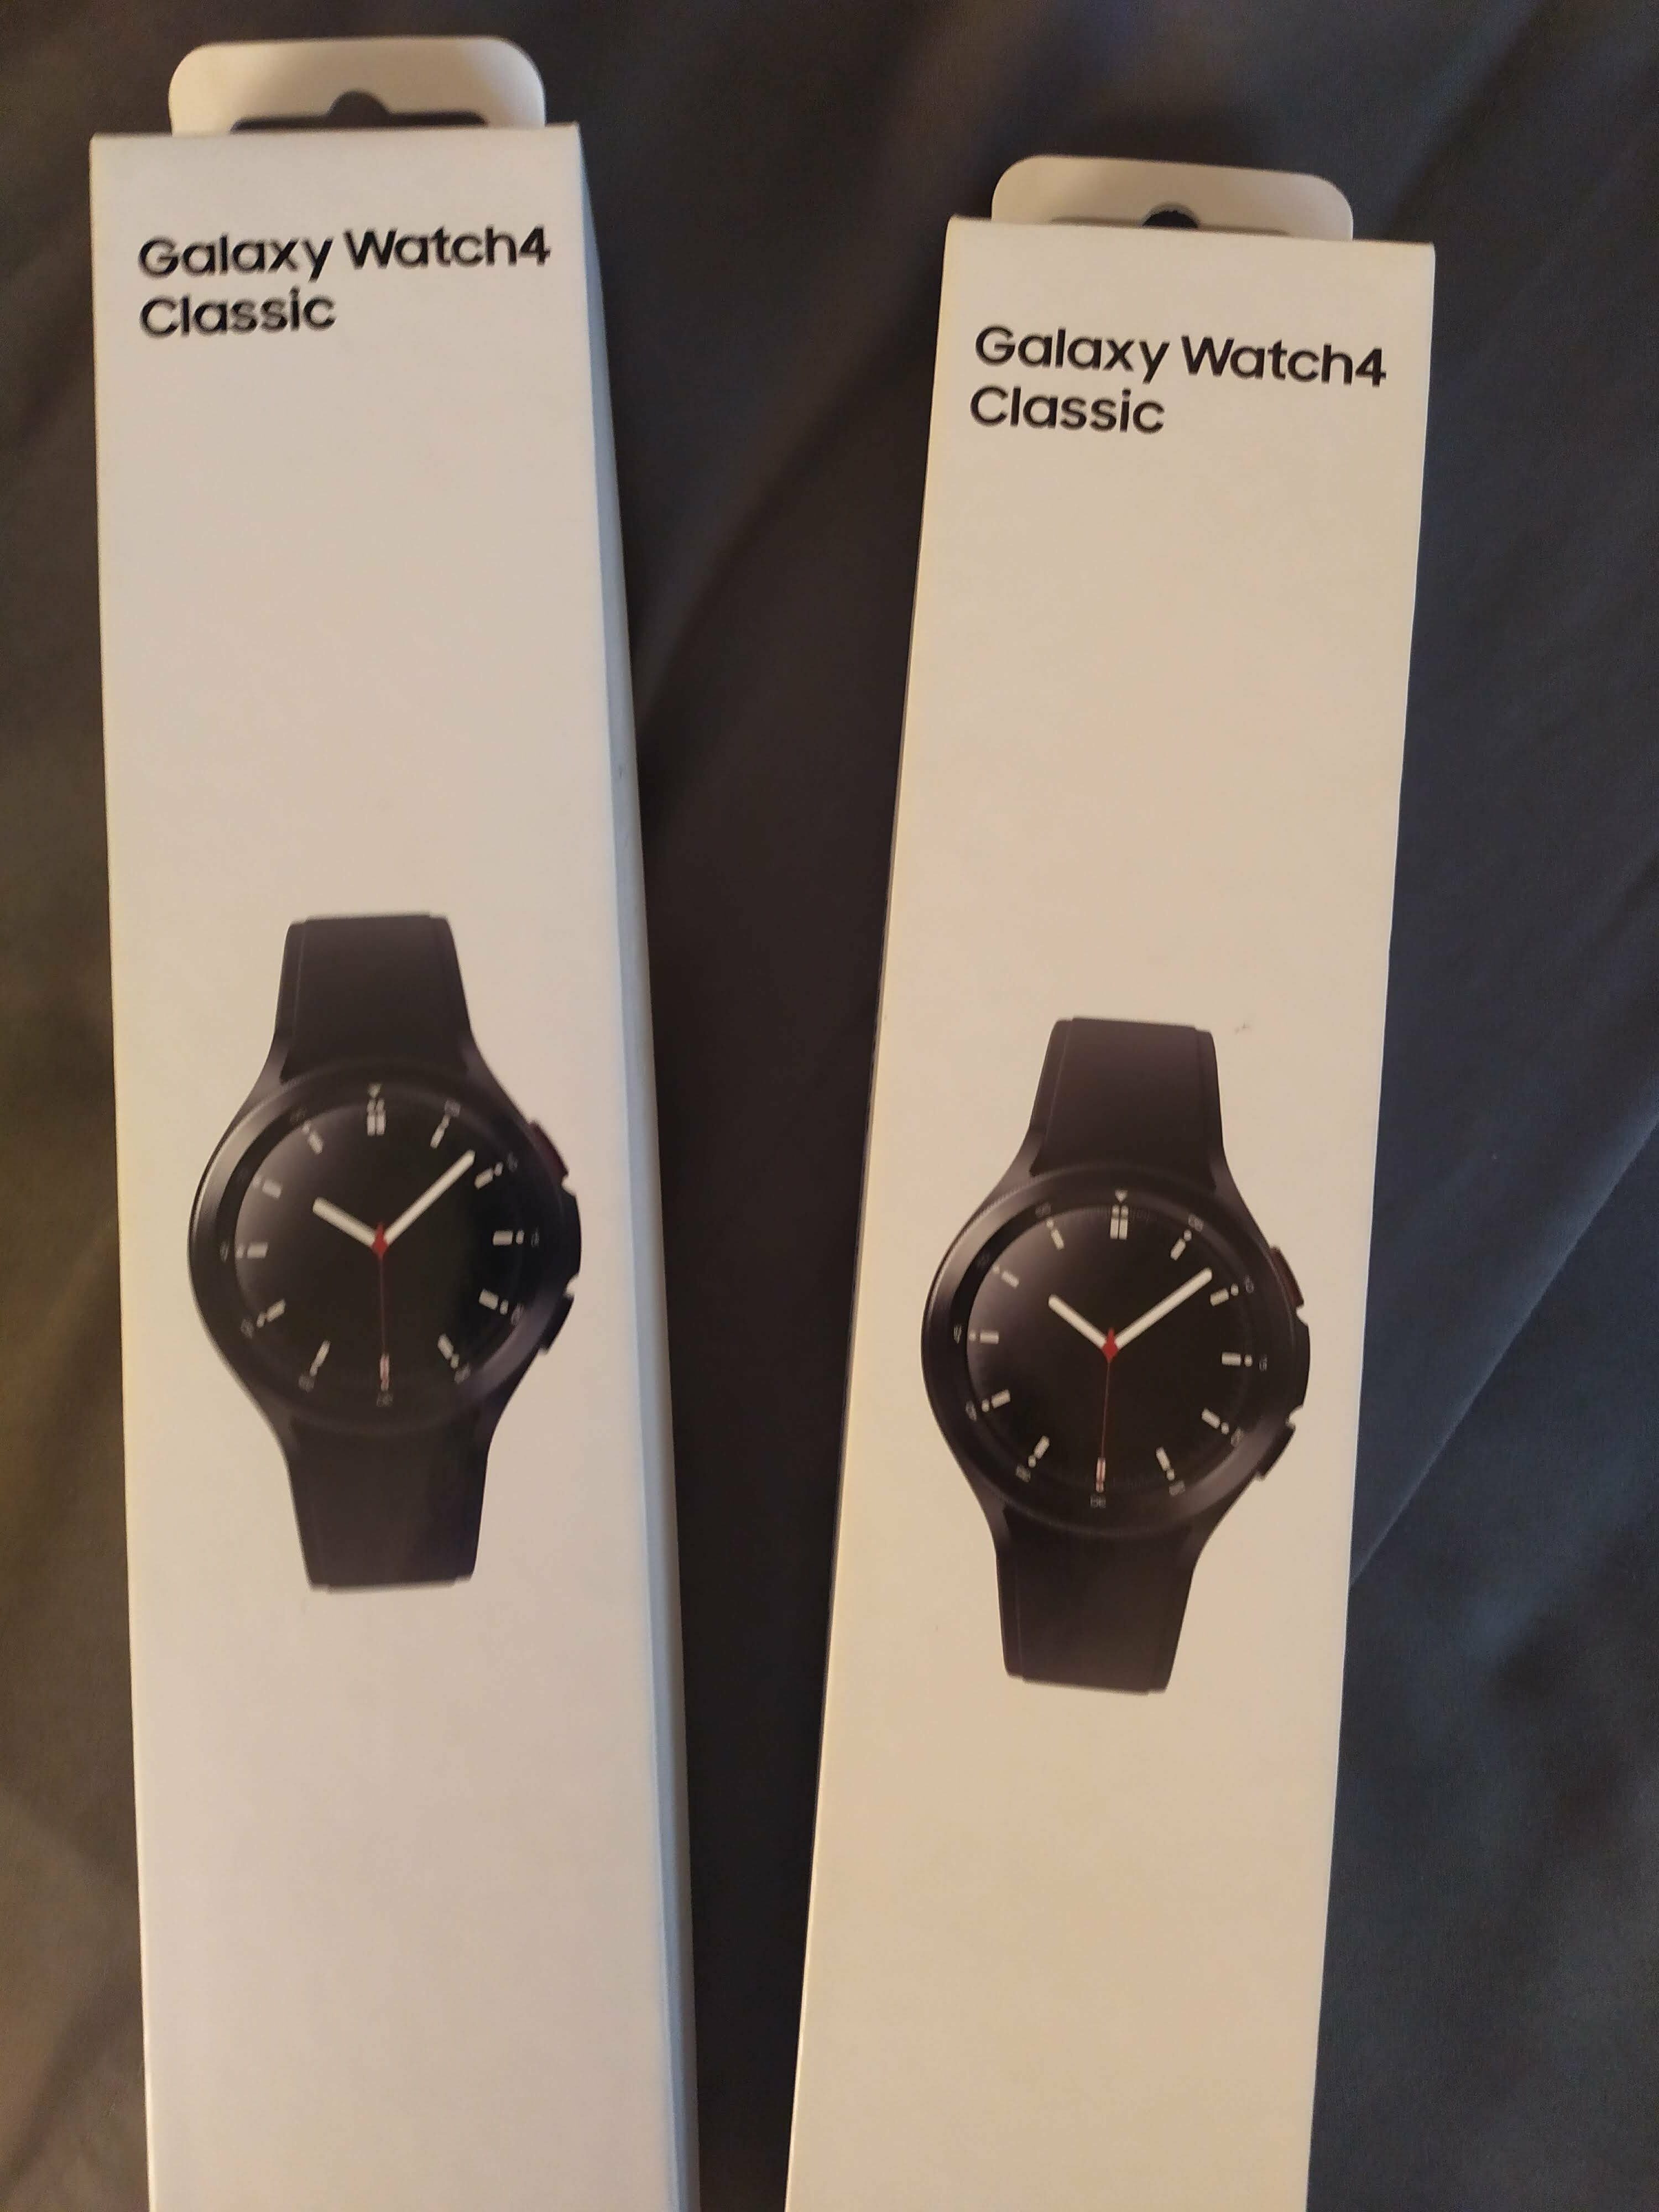 Walmart] [YMMV] Samsung Galaxy Watch4 - Forums In-Store Only RedFlagDeals.com Stock $99 Limited Classic - 46MM - 